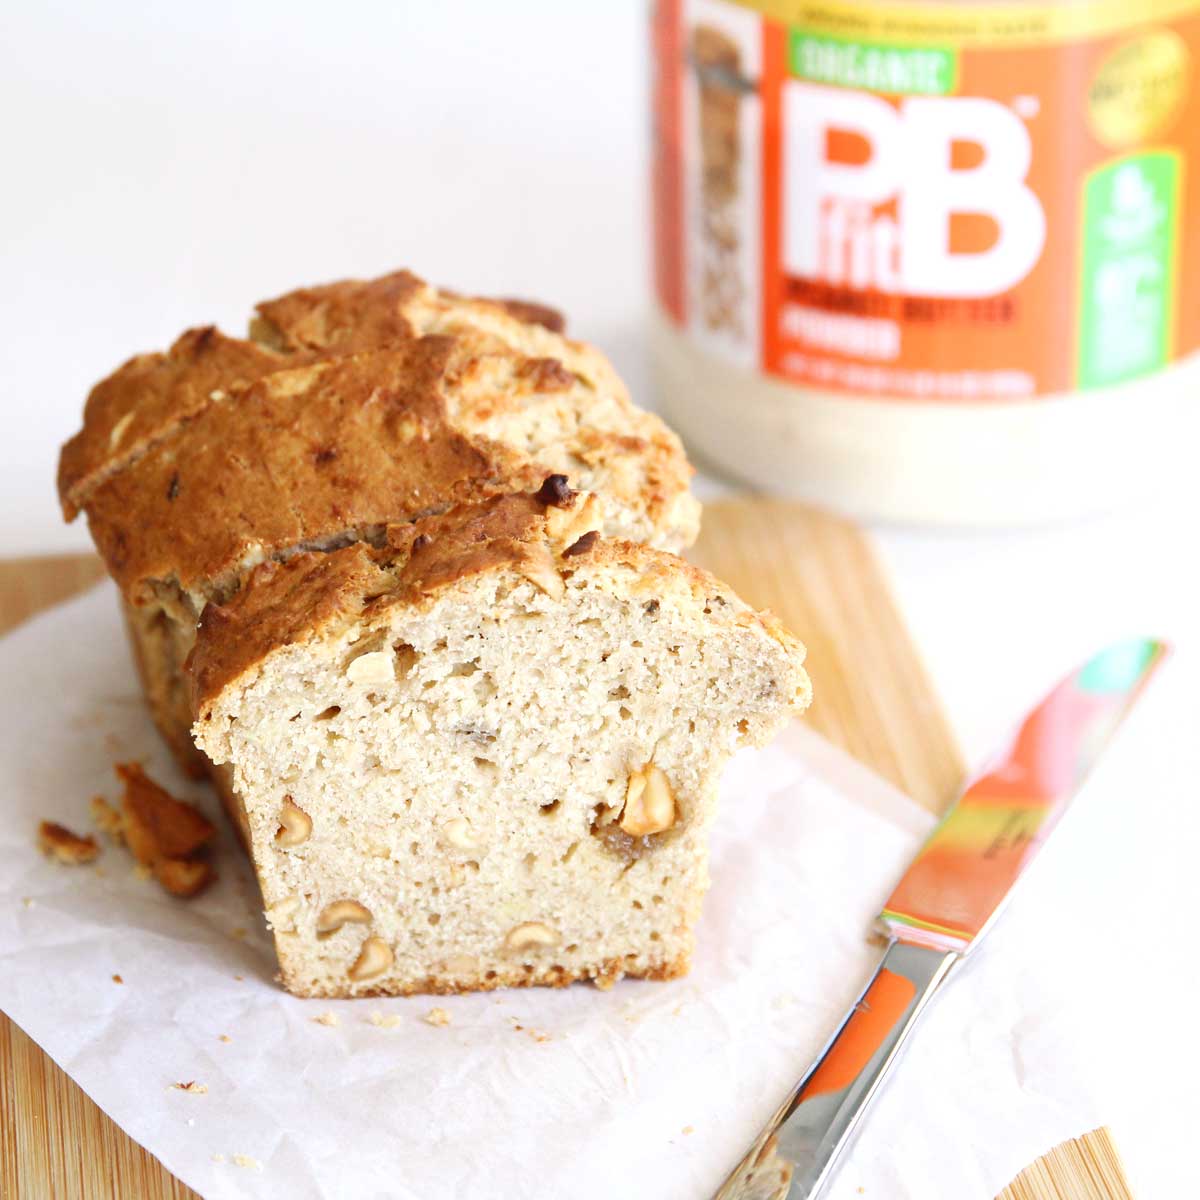 High Protein PB Fit Peanut Butter Banana Bread (Dairy Free, Egg Free Recipe) - yeast bread